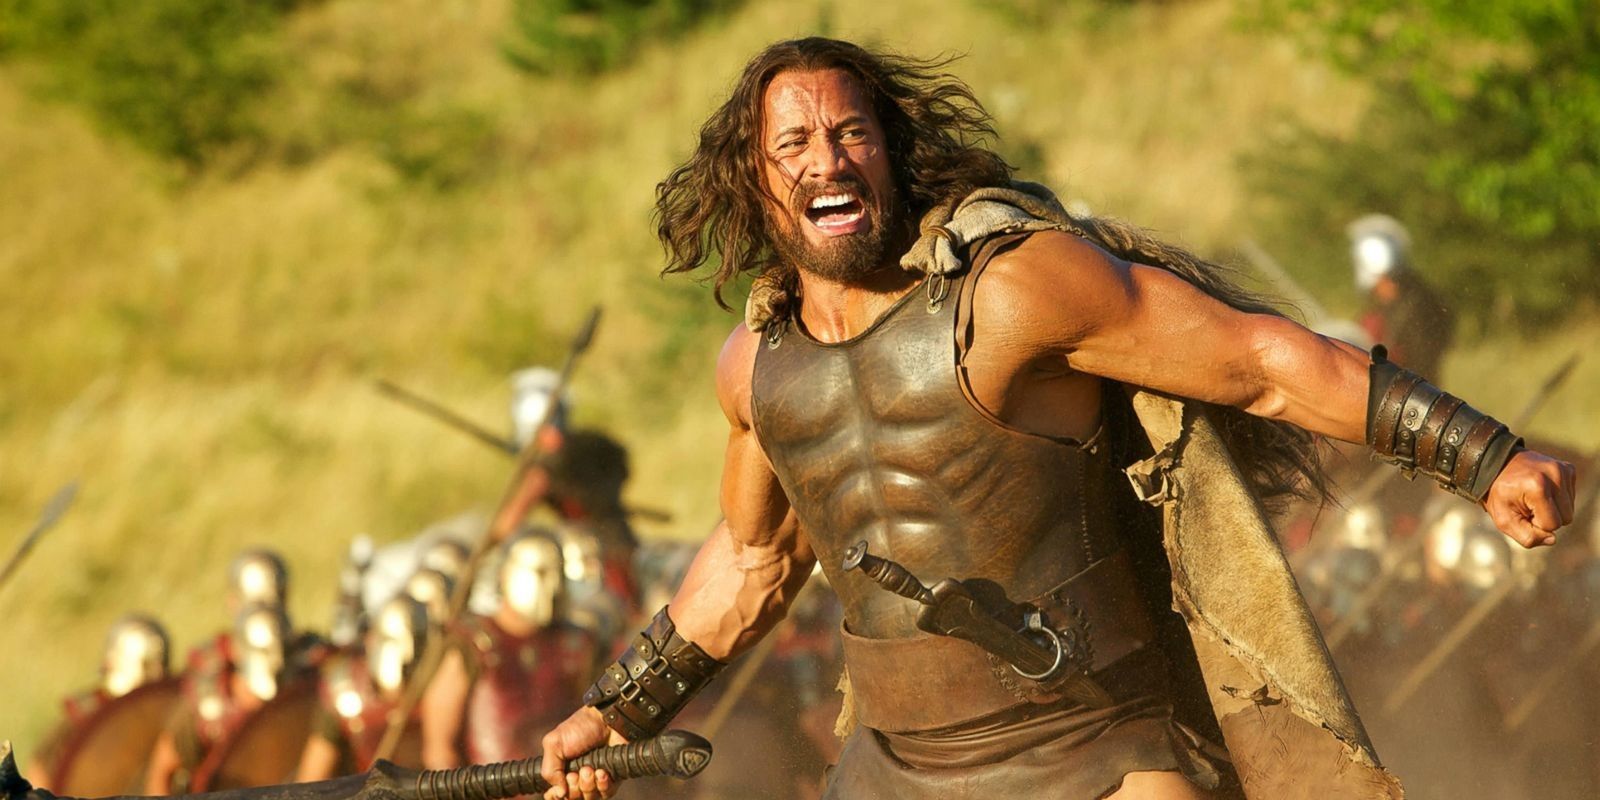 Dwayne Johnson as Hercules in an action scene yelling and waving a weapon